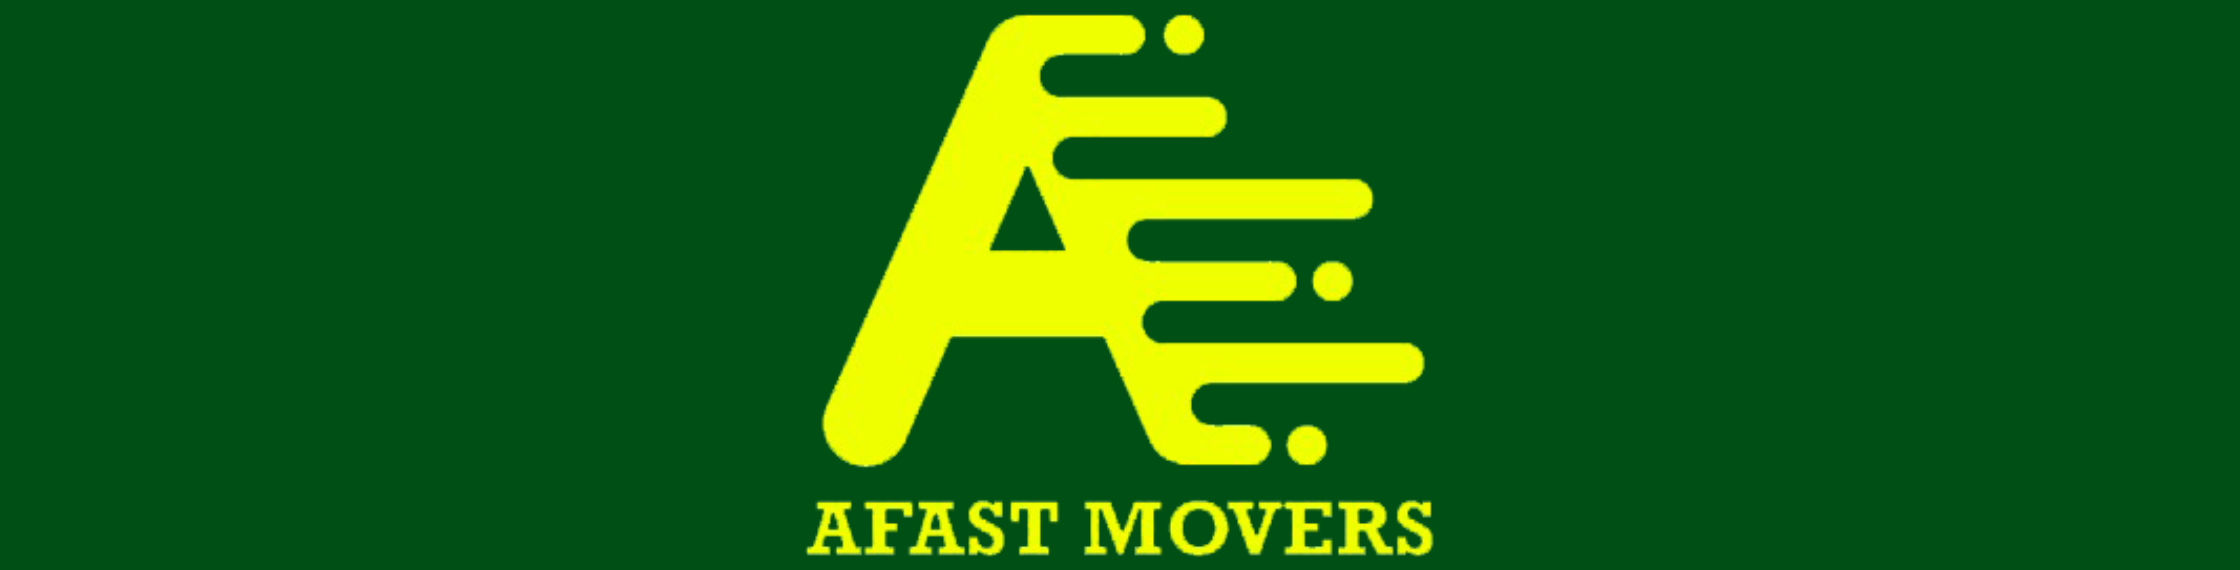 Afast Movers